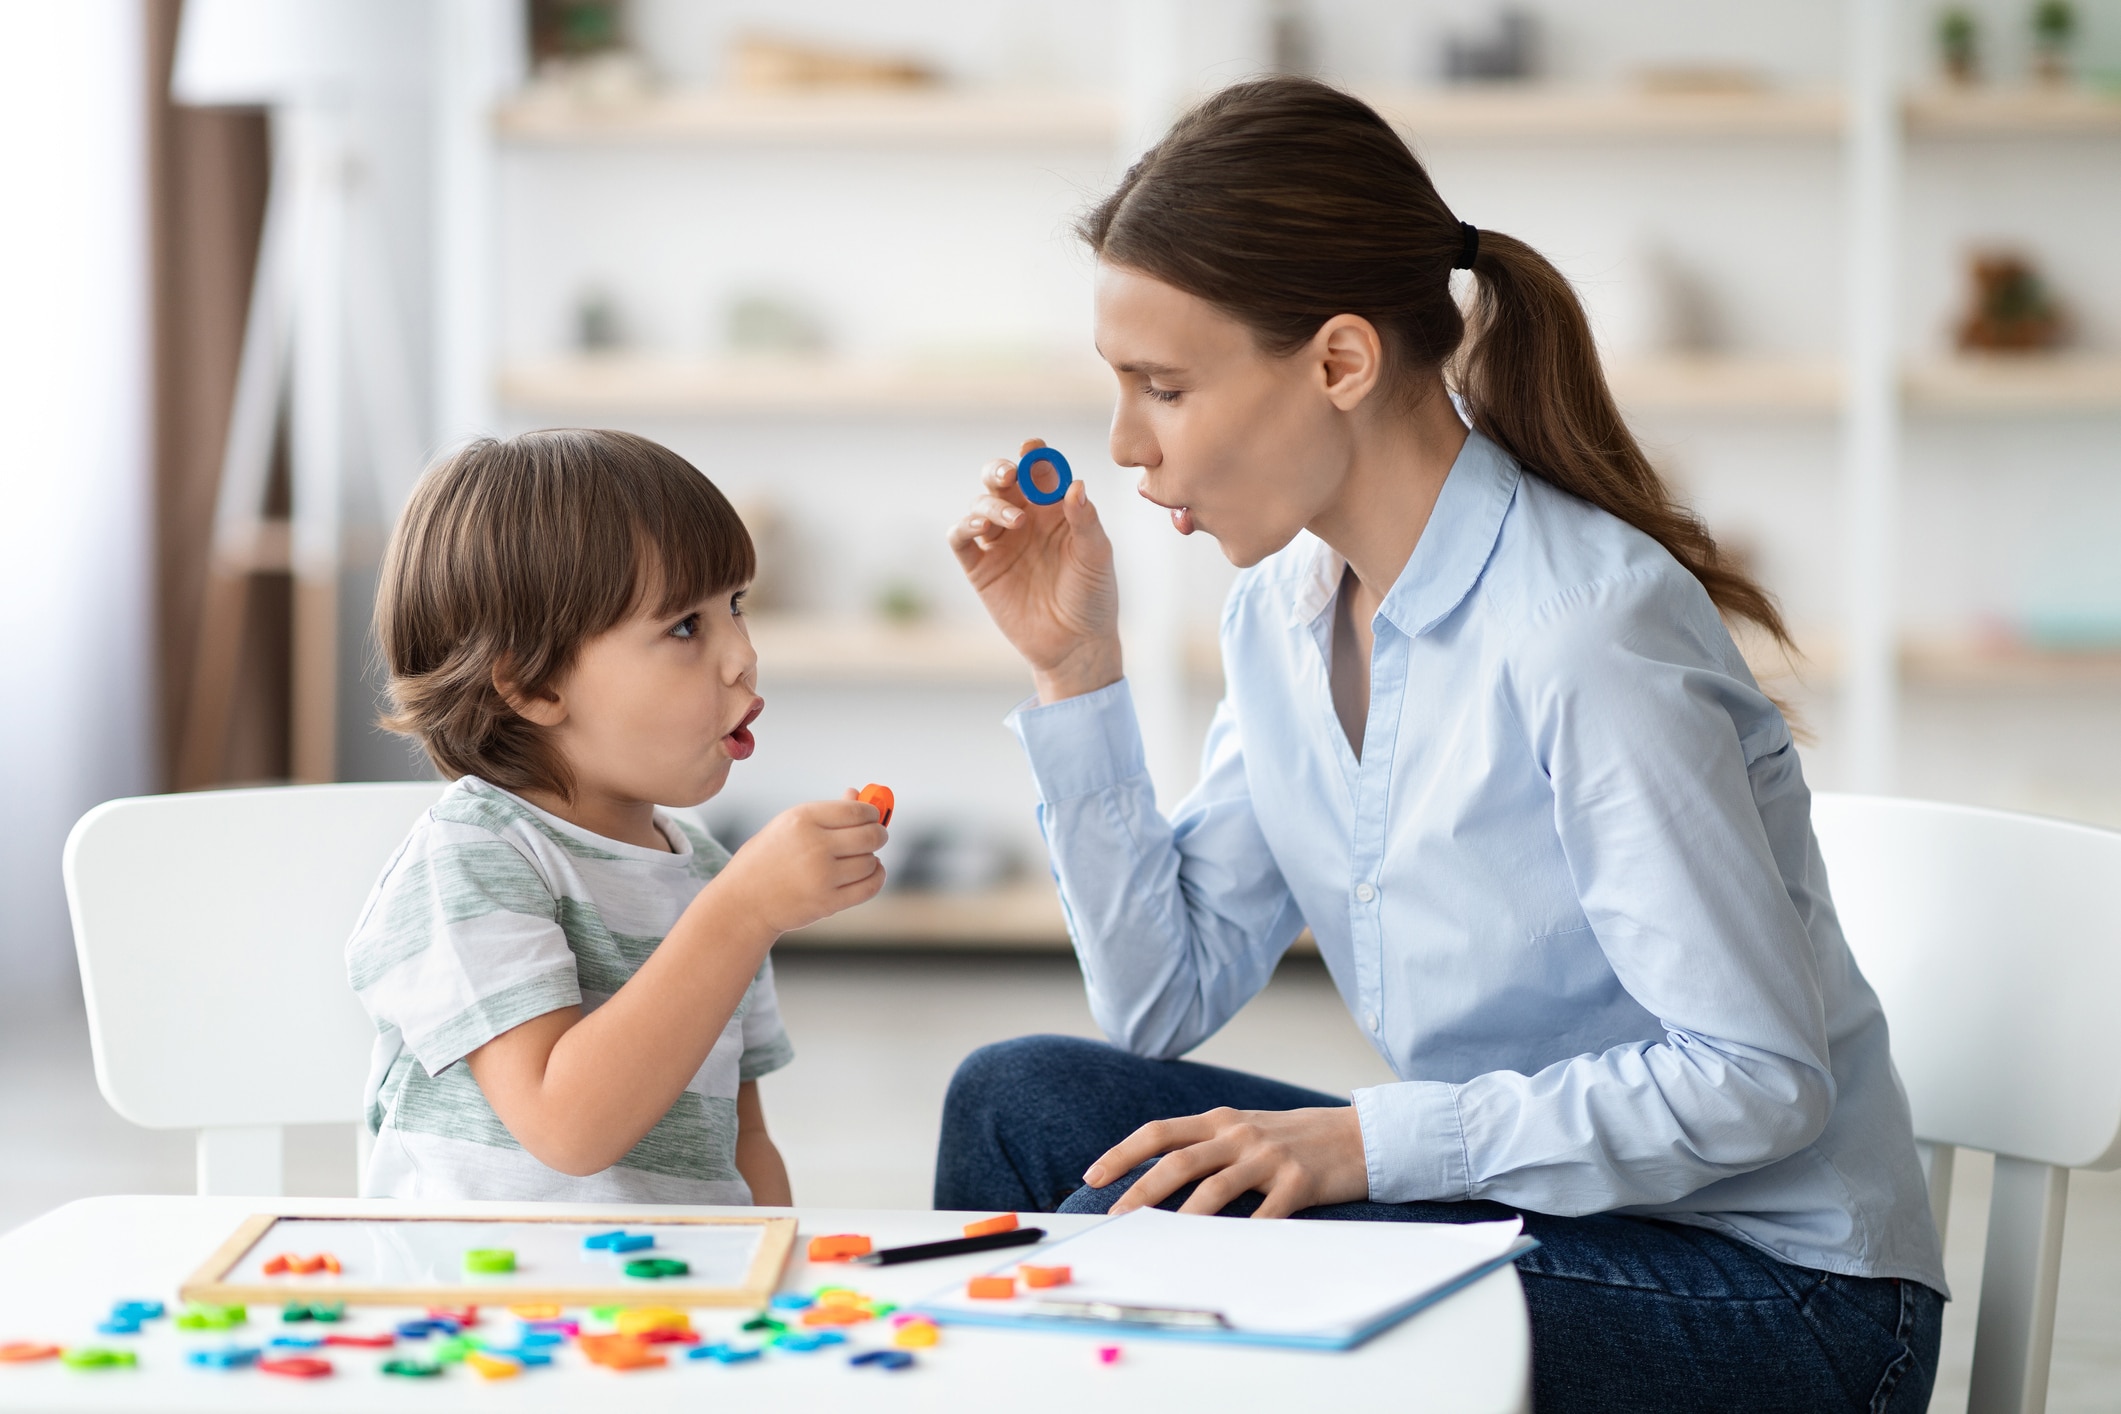 Speech therapist practicing sounds of letters at a table with a young child during pediatric speech therapy